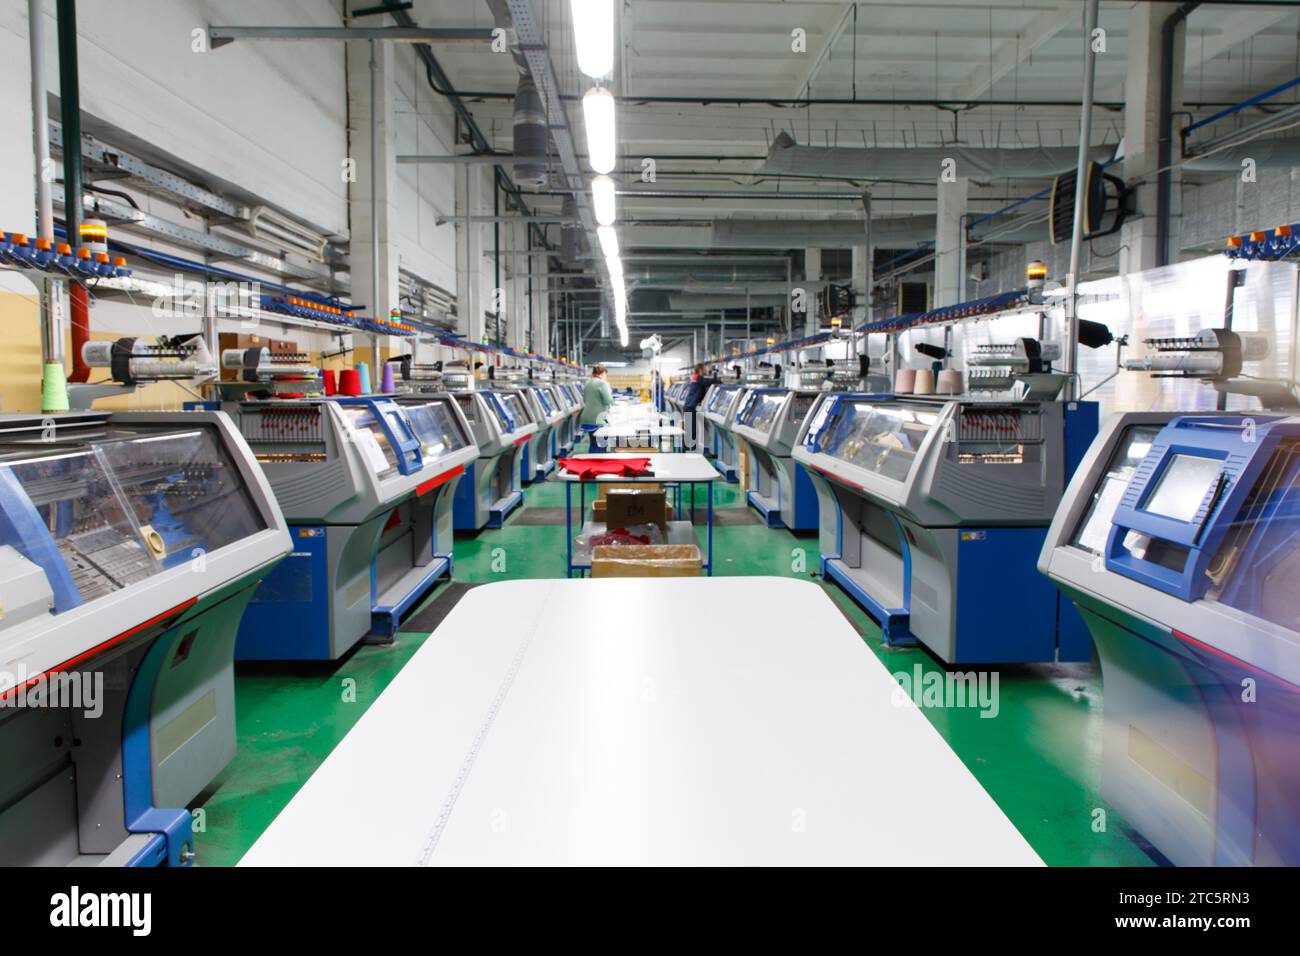 A row of industrial textil flat knitting machines in a knitwear factory. An industrial line of modern automatic knitting machines arranged in two rows Stock Photo